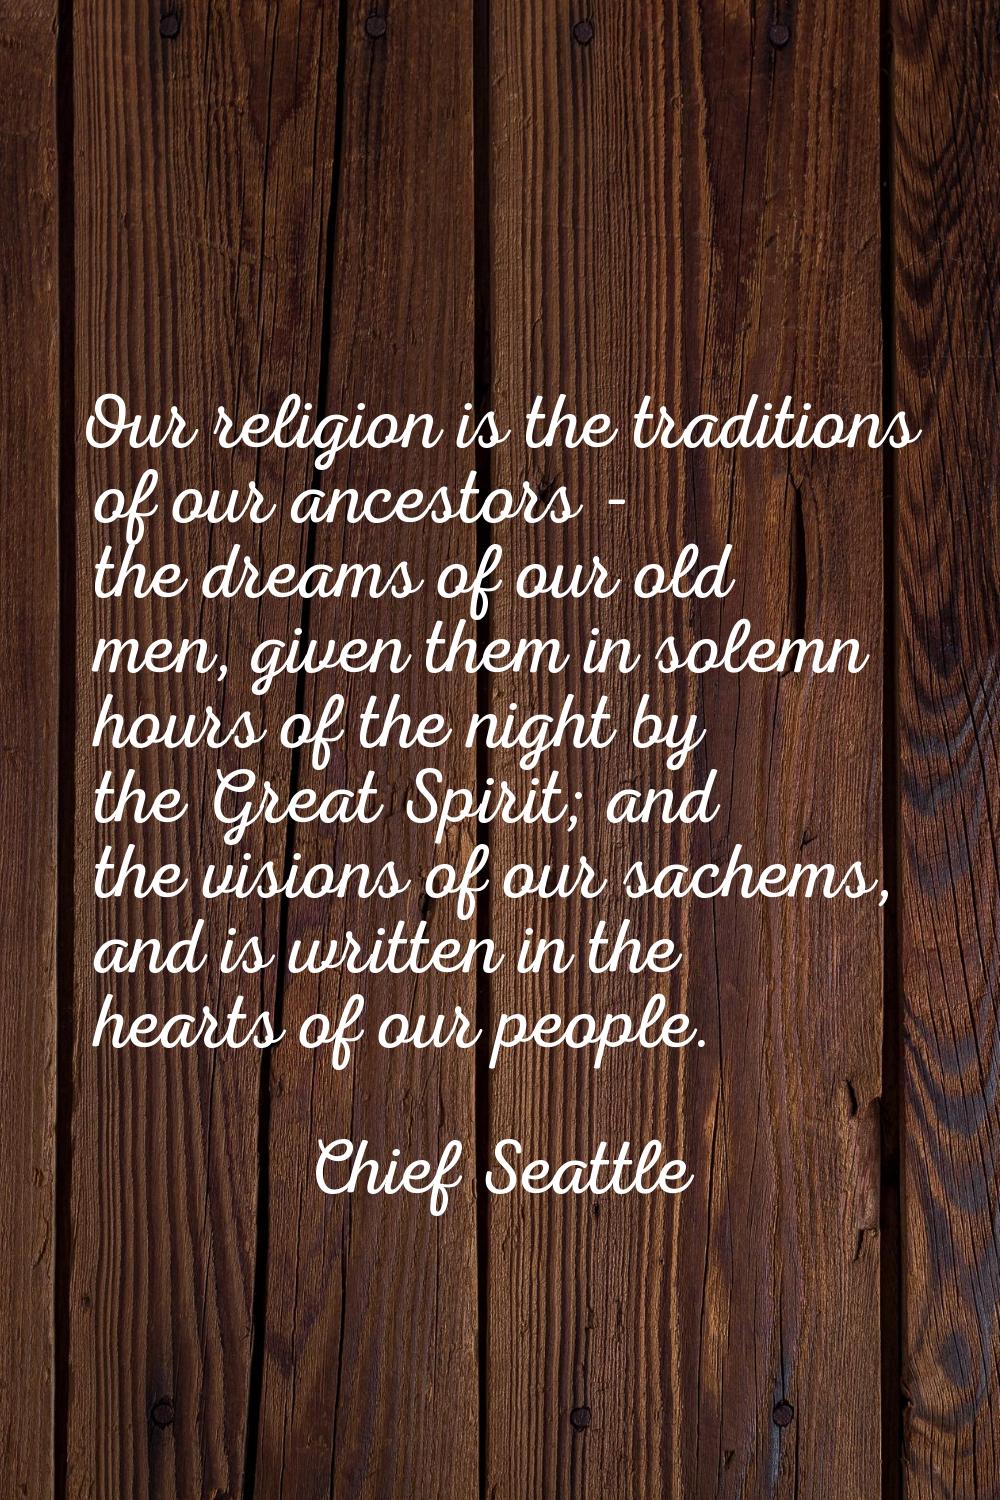 Our religion is the traditions of our ancestors - the dreams of our old men, given them in solemn h